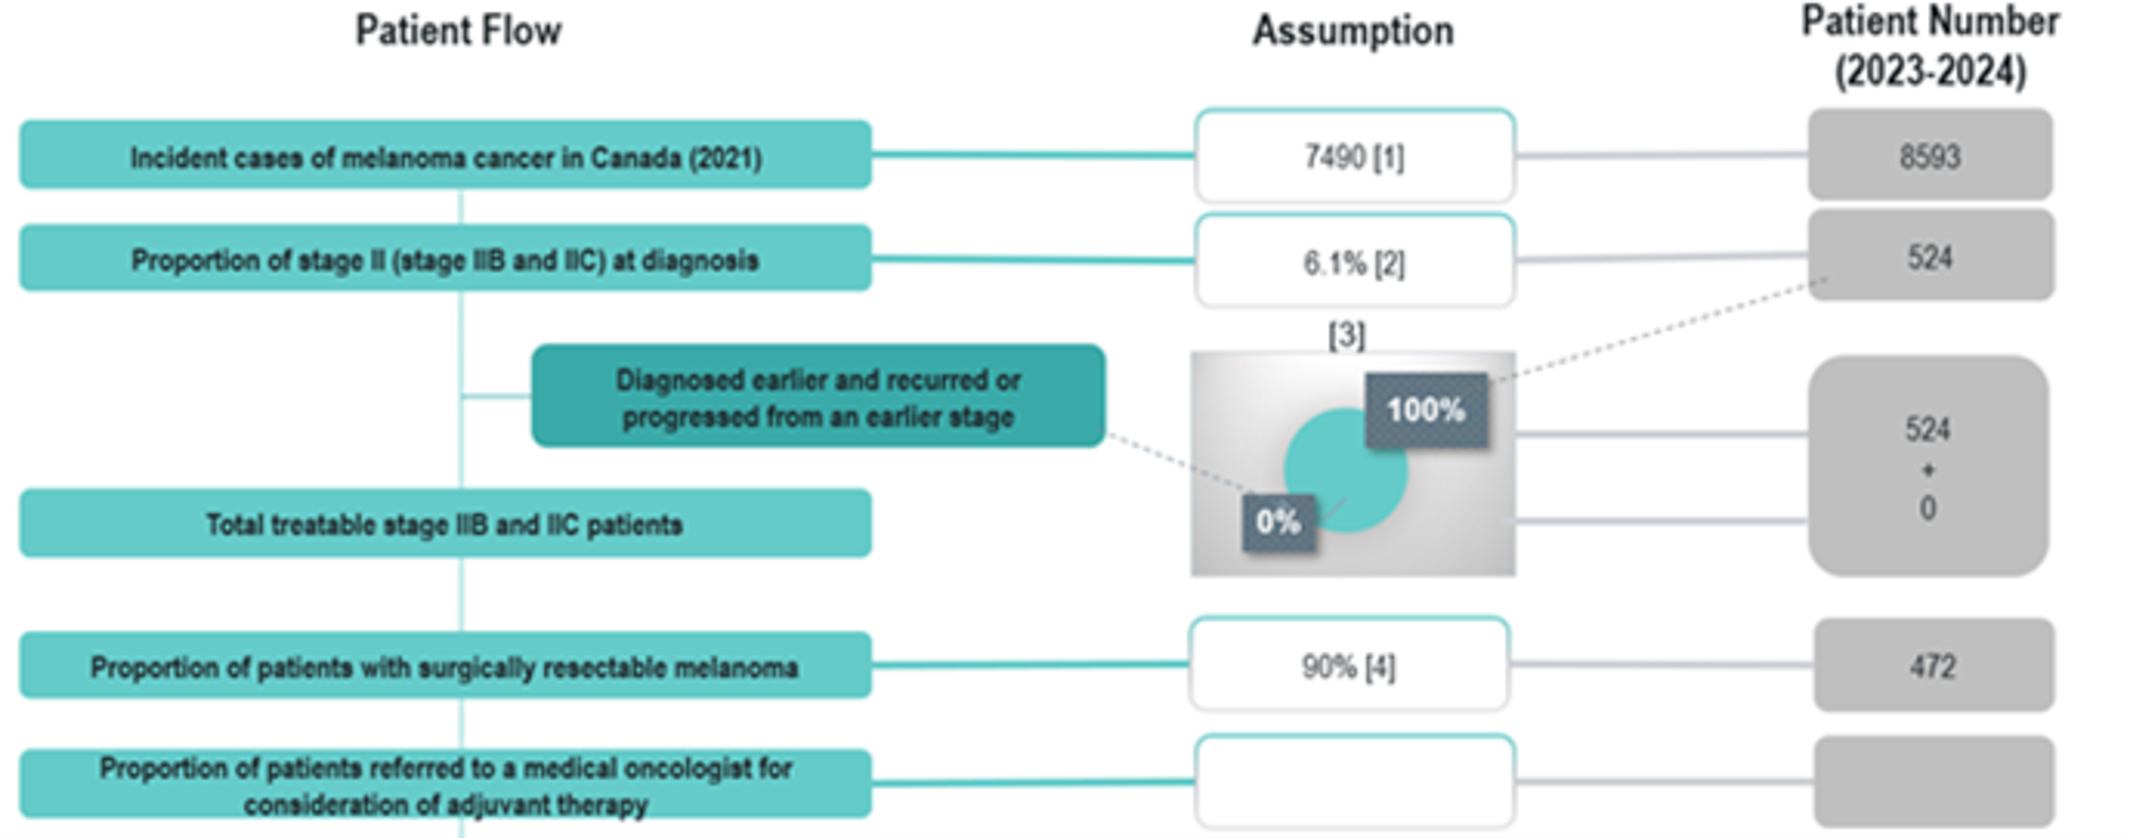 Figure showing the calculation of the target population. Inputs consist of the incident cases of melanoma cancer in Canada, the proportion of stage II (stage IIB and IIC) at diagnosis, the total treatment stage IIB and IIC patients, the proportion of patients with surgically resectable melanoma, and the proportion of patients referred to a medical oncologist for consideration of adjuvant therapy.